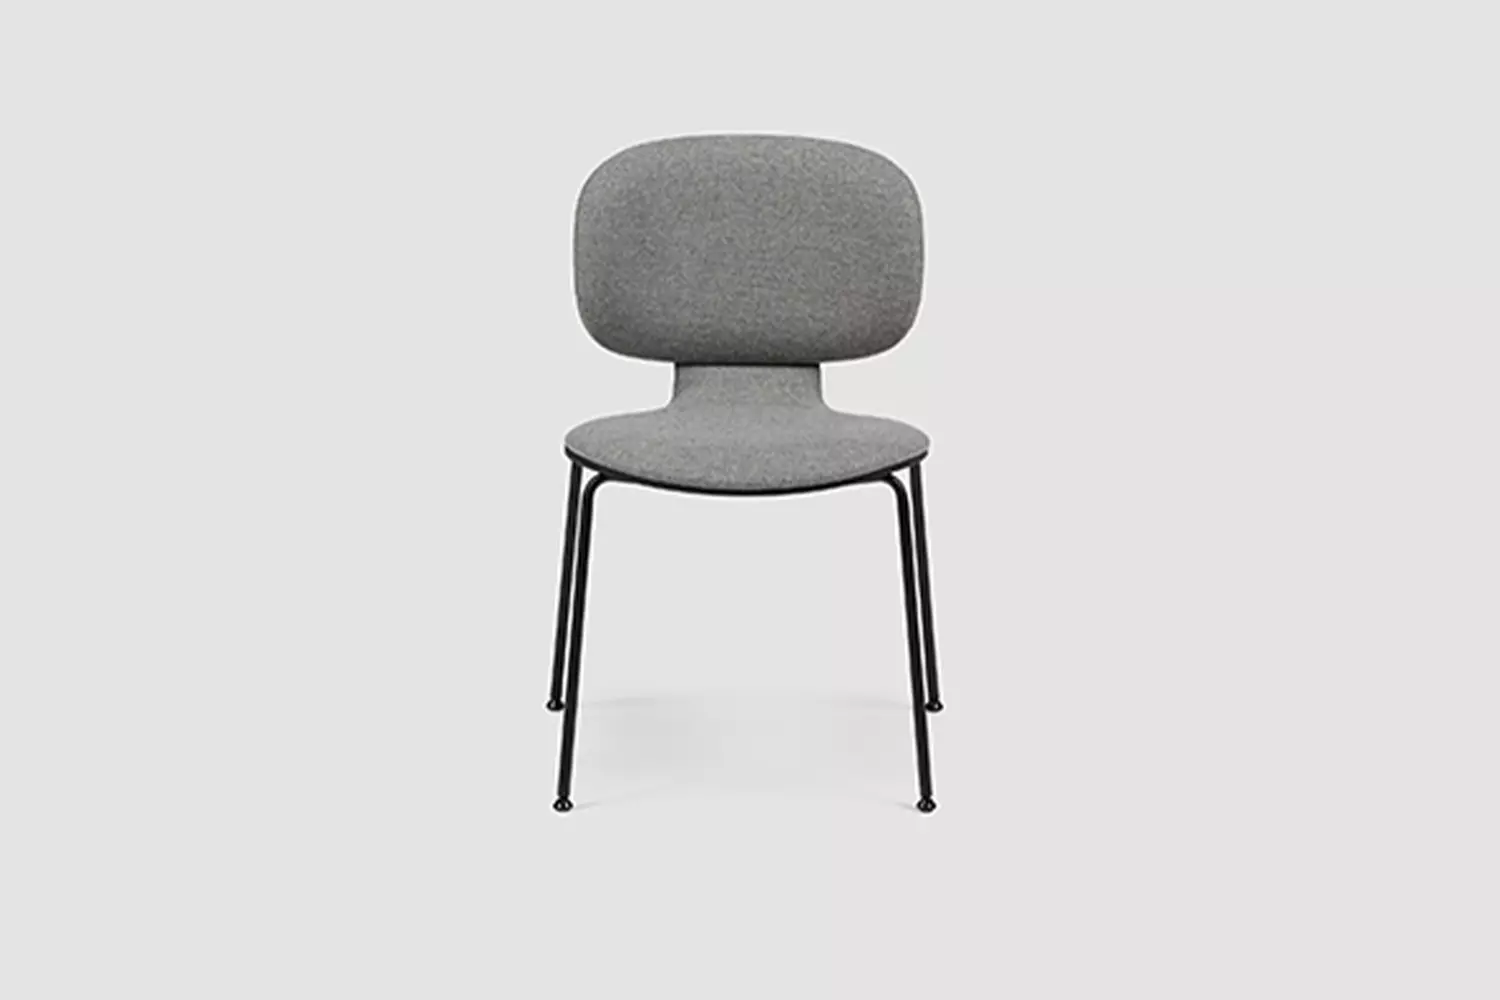 studio-chair-4-fuss, with castors Upholstered Non-pholstered Premium stackable Chair, Bene Office furniture, Image 5